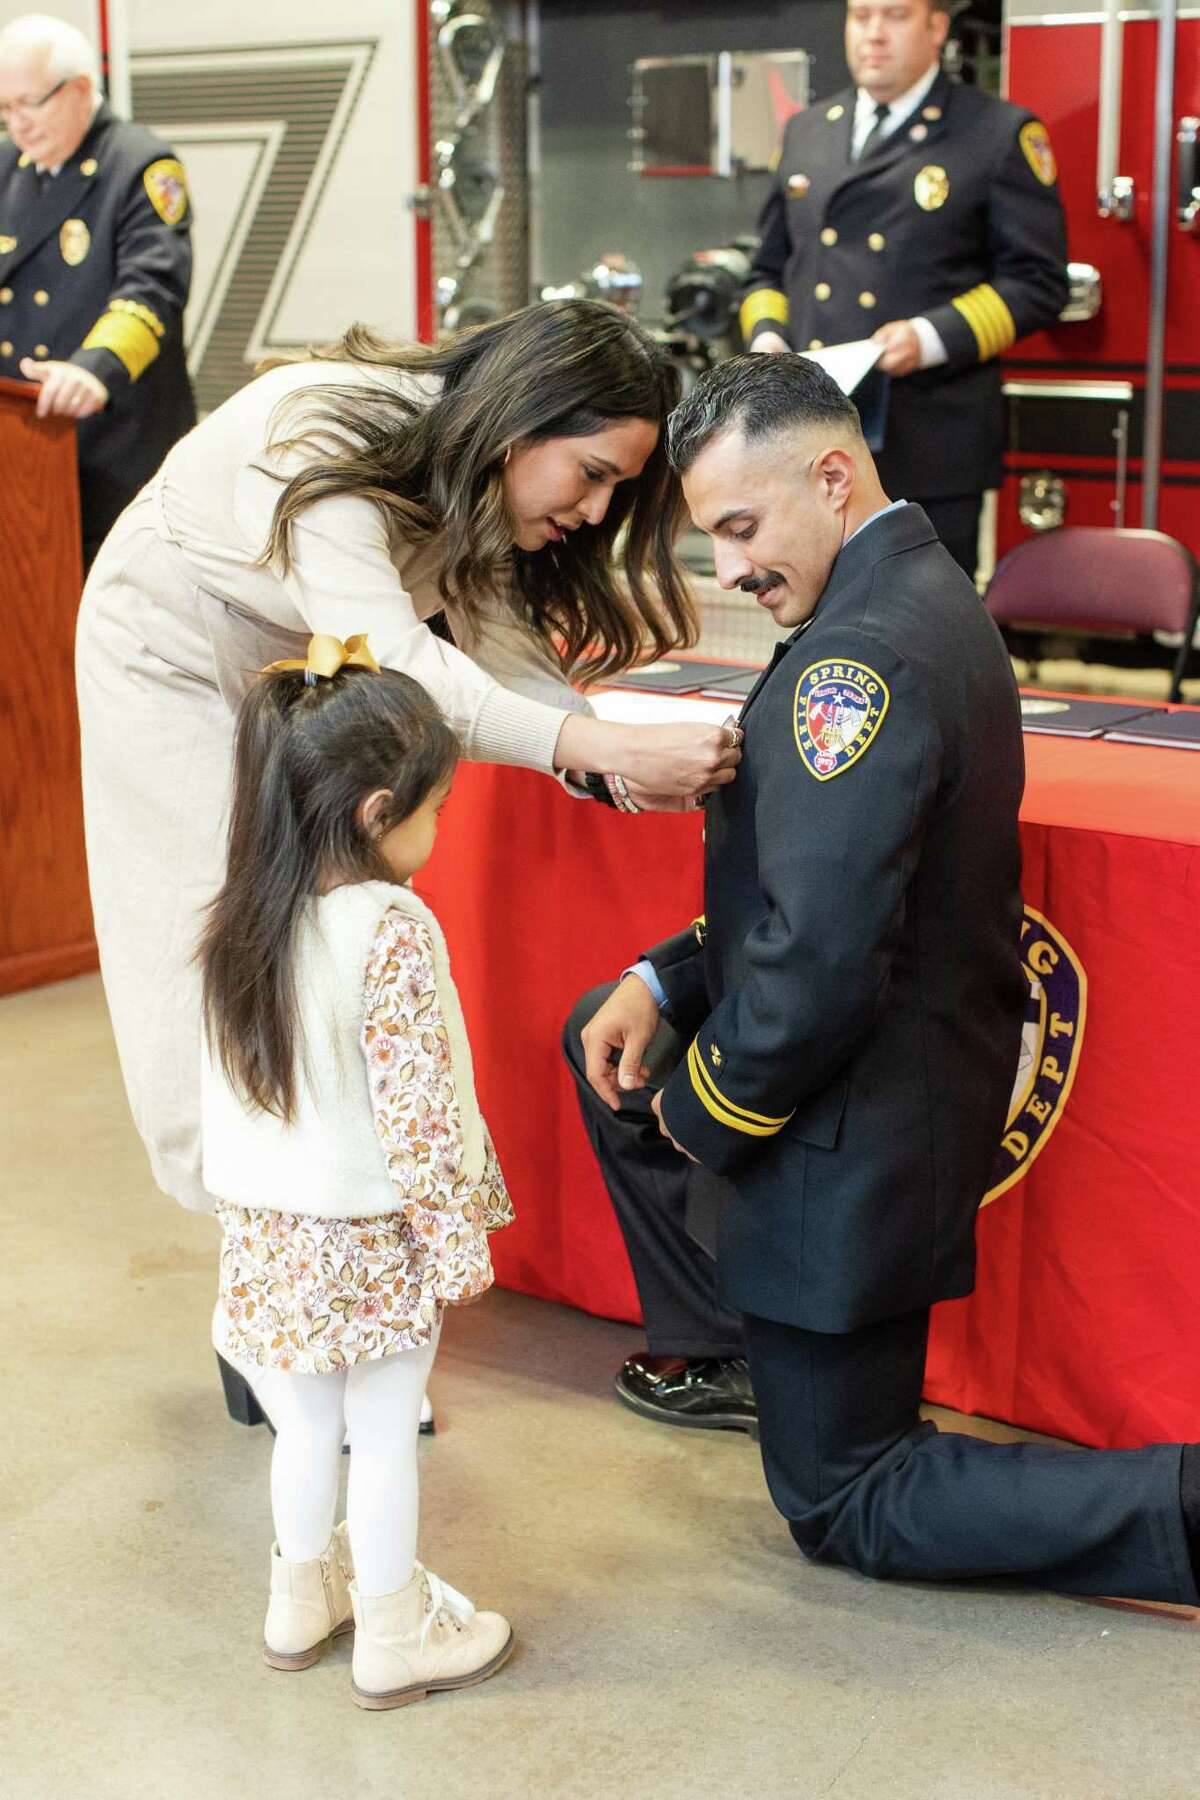 Captain Michael Alaniz is pinned by his wife, Wendy, and daughter, Mila Rose, during the Spring Fire Department's pinning ceremony for officers and apparatus operators who received promotions during the pandemic held Nov. 19, 2021, at Station 71.